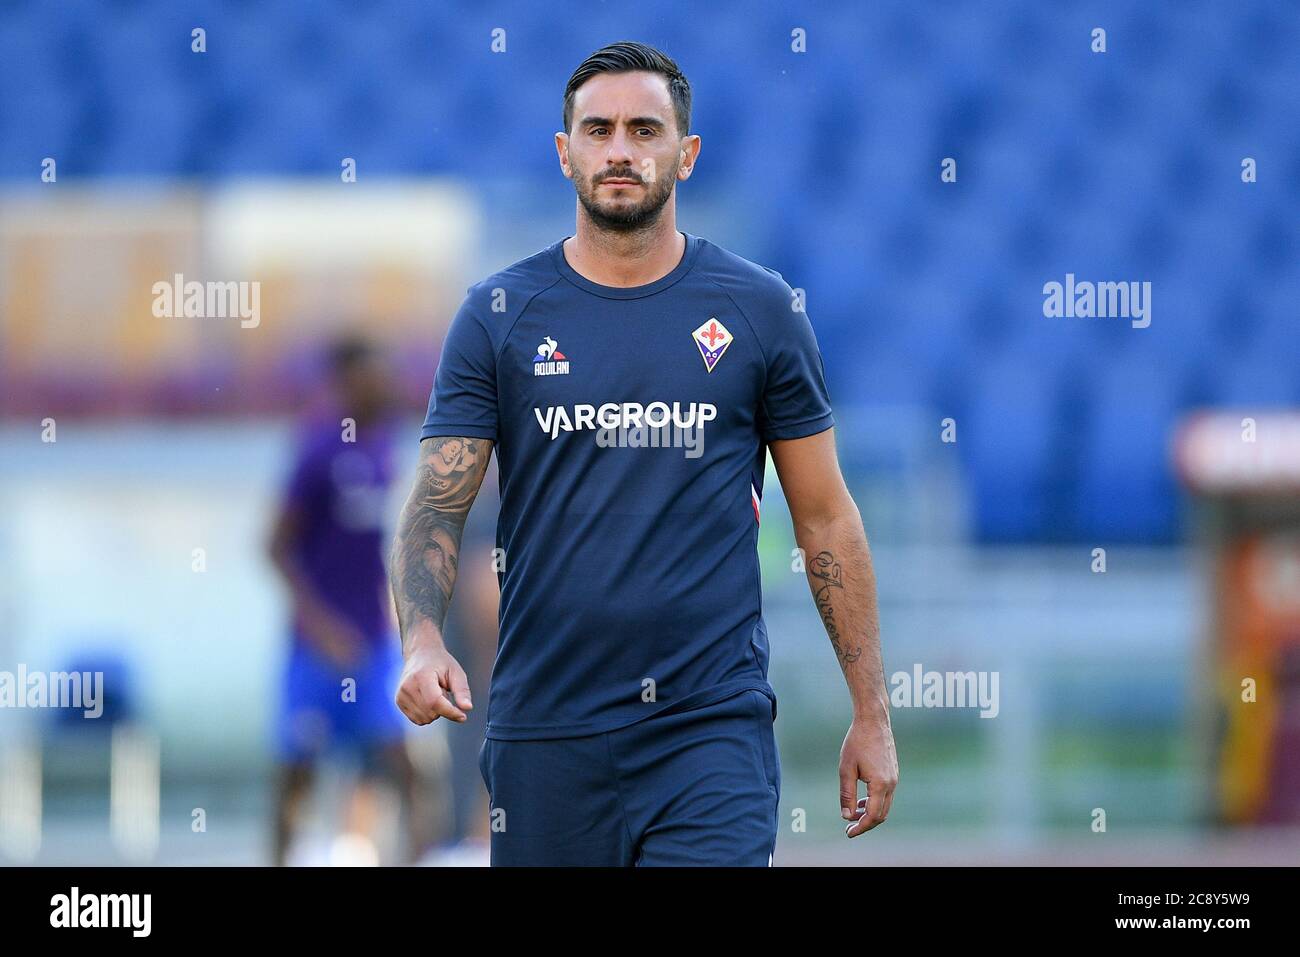 Rome, Italy. 26th July, 2020. Alberto Aquilani of ACF Fiorentina during the Serie A match between Roma and Fiorentina at Stadio Olimpico, Rome, Italy on 26 July 2020. Photo by Giuseppe Maffia. Credit: UK Sports Pics Ltd/Alamy Live News Stock Photo